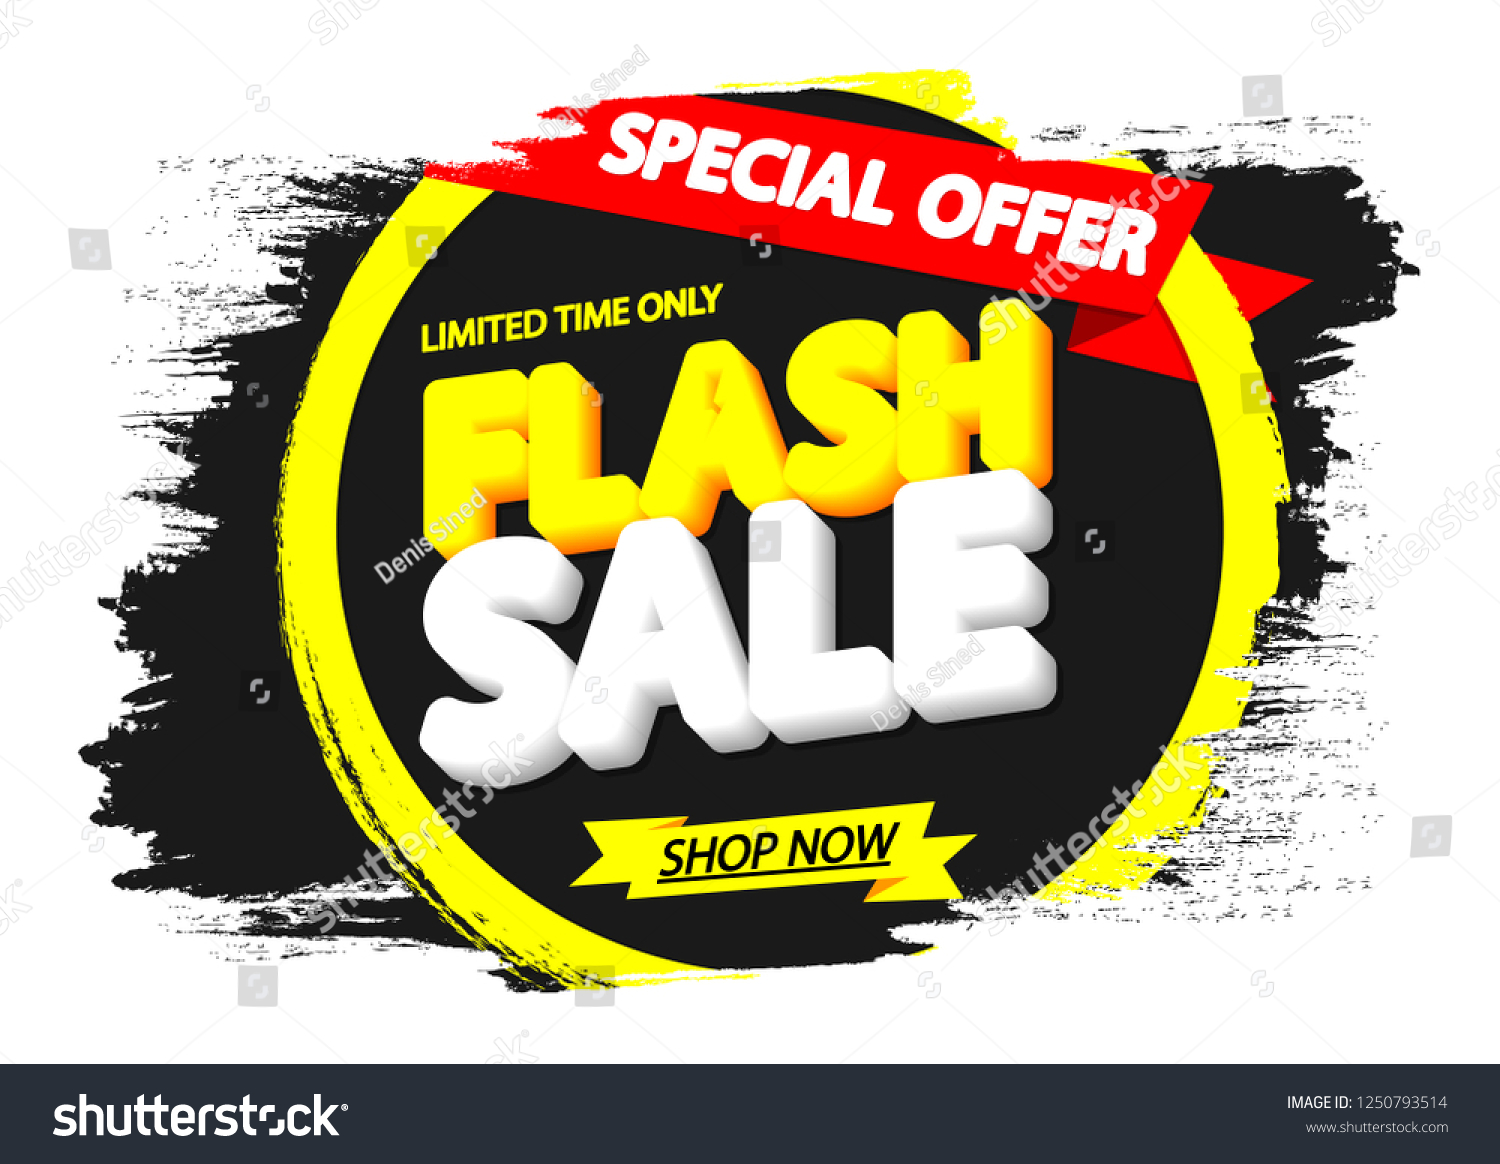 Flash Sale, banner design template, discount tag, grunge brush, special offer, red ribbon, vector illustration #1250793514